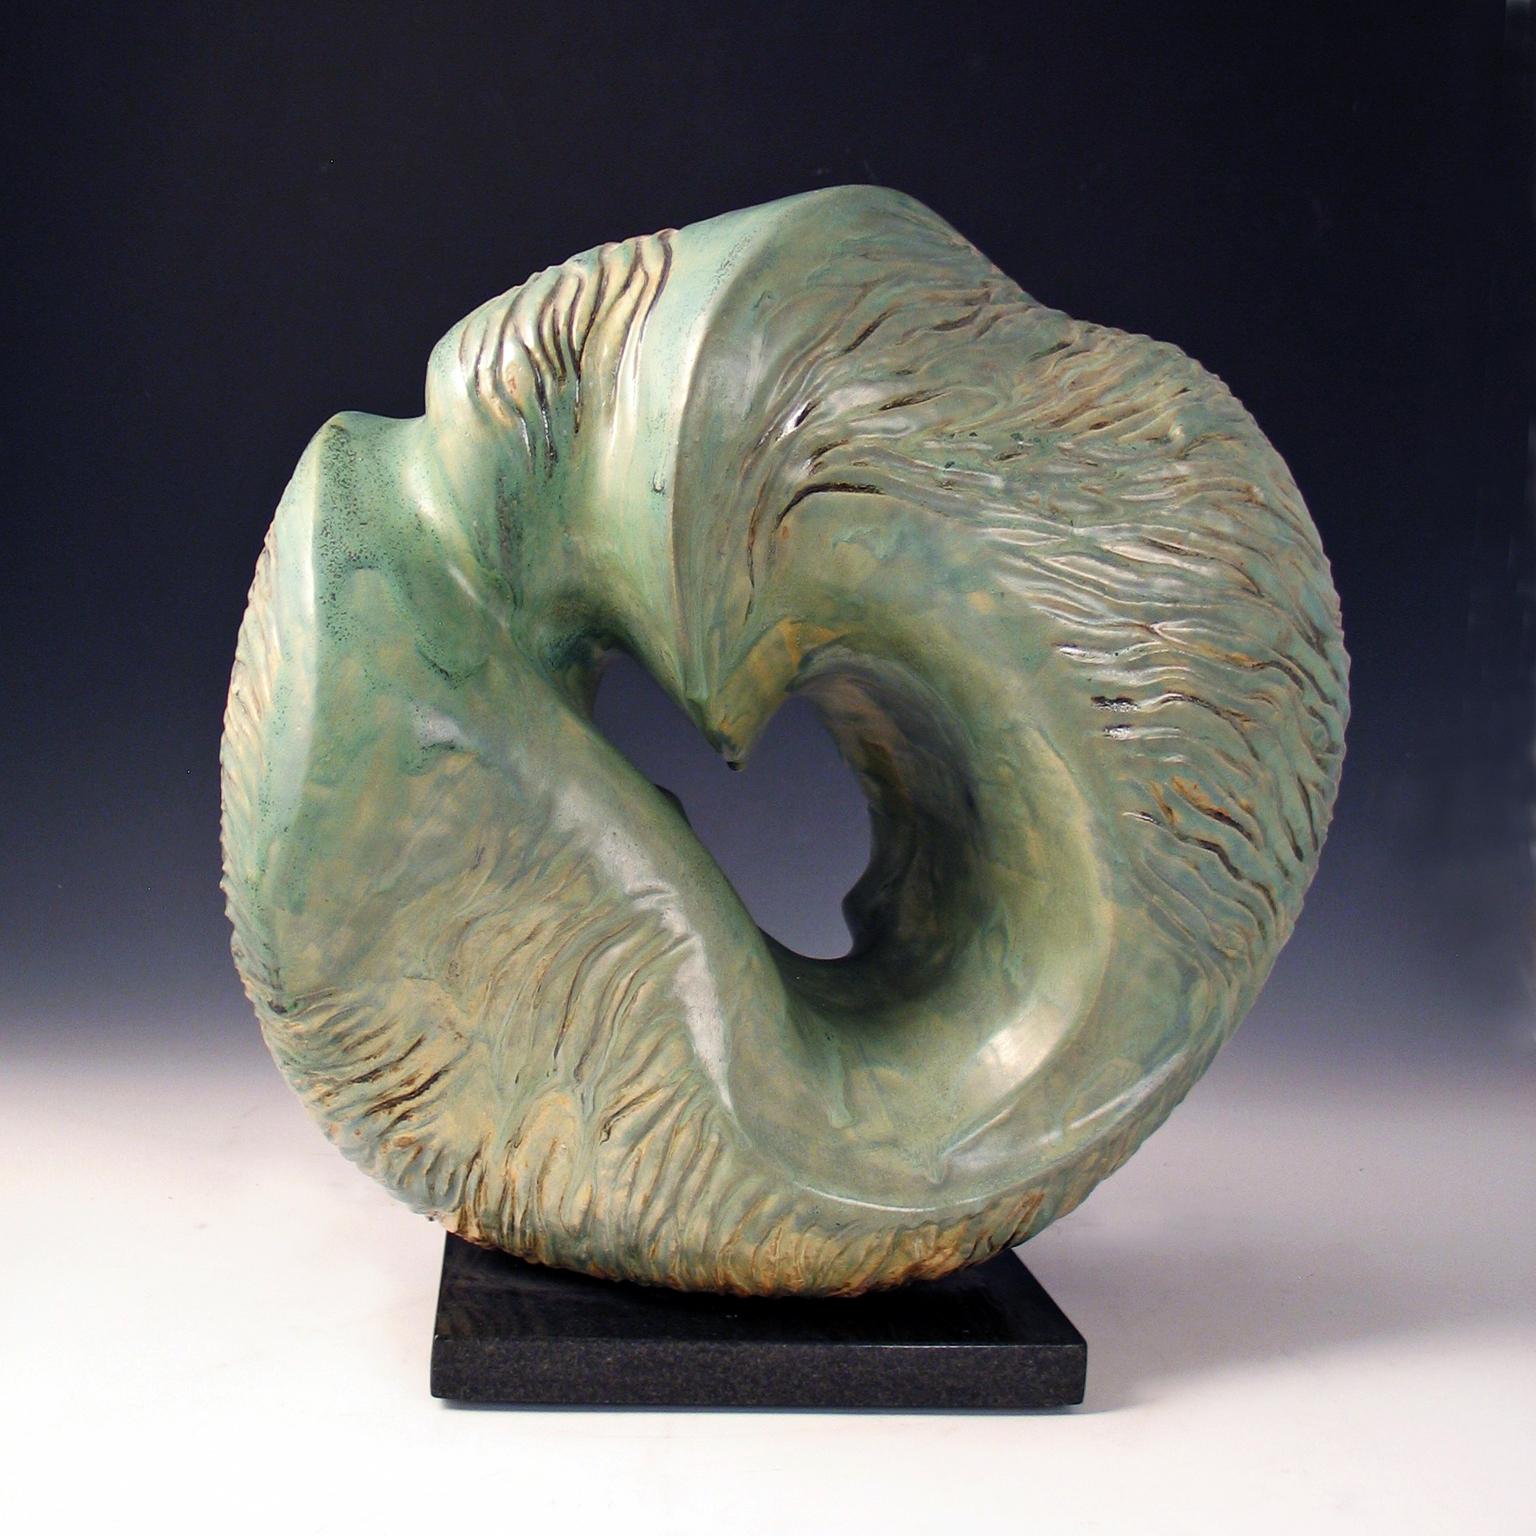 “Aqua Incision”, blue green circular ceramic, carved with flowing water lines  - Sculpture by Elaine Lorenz